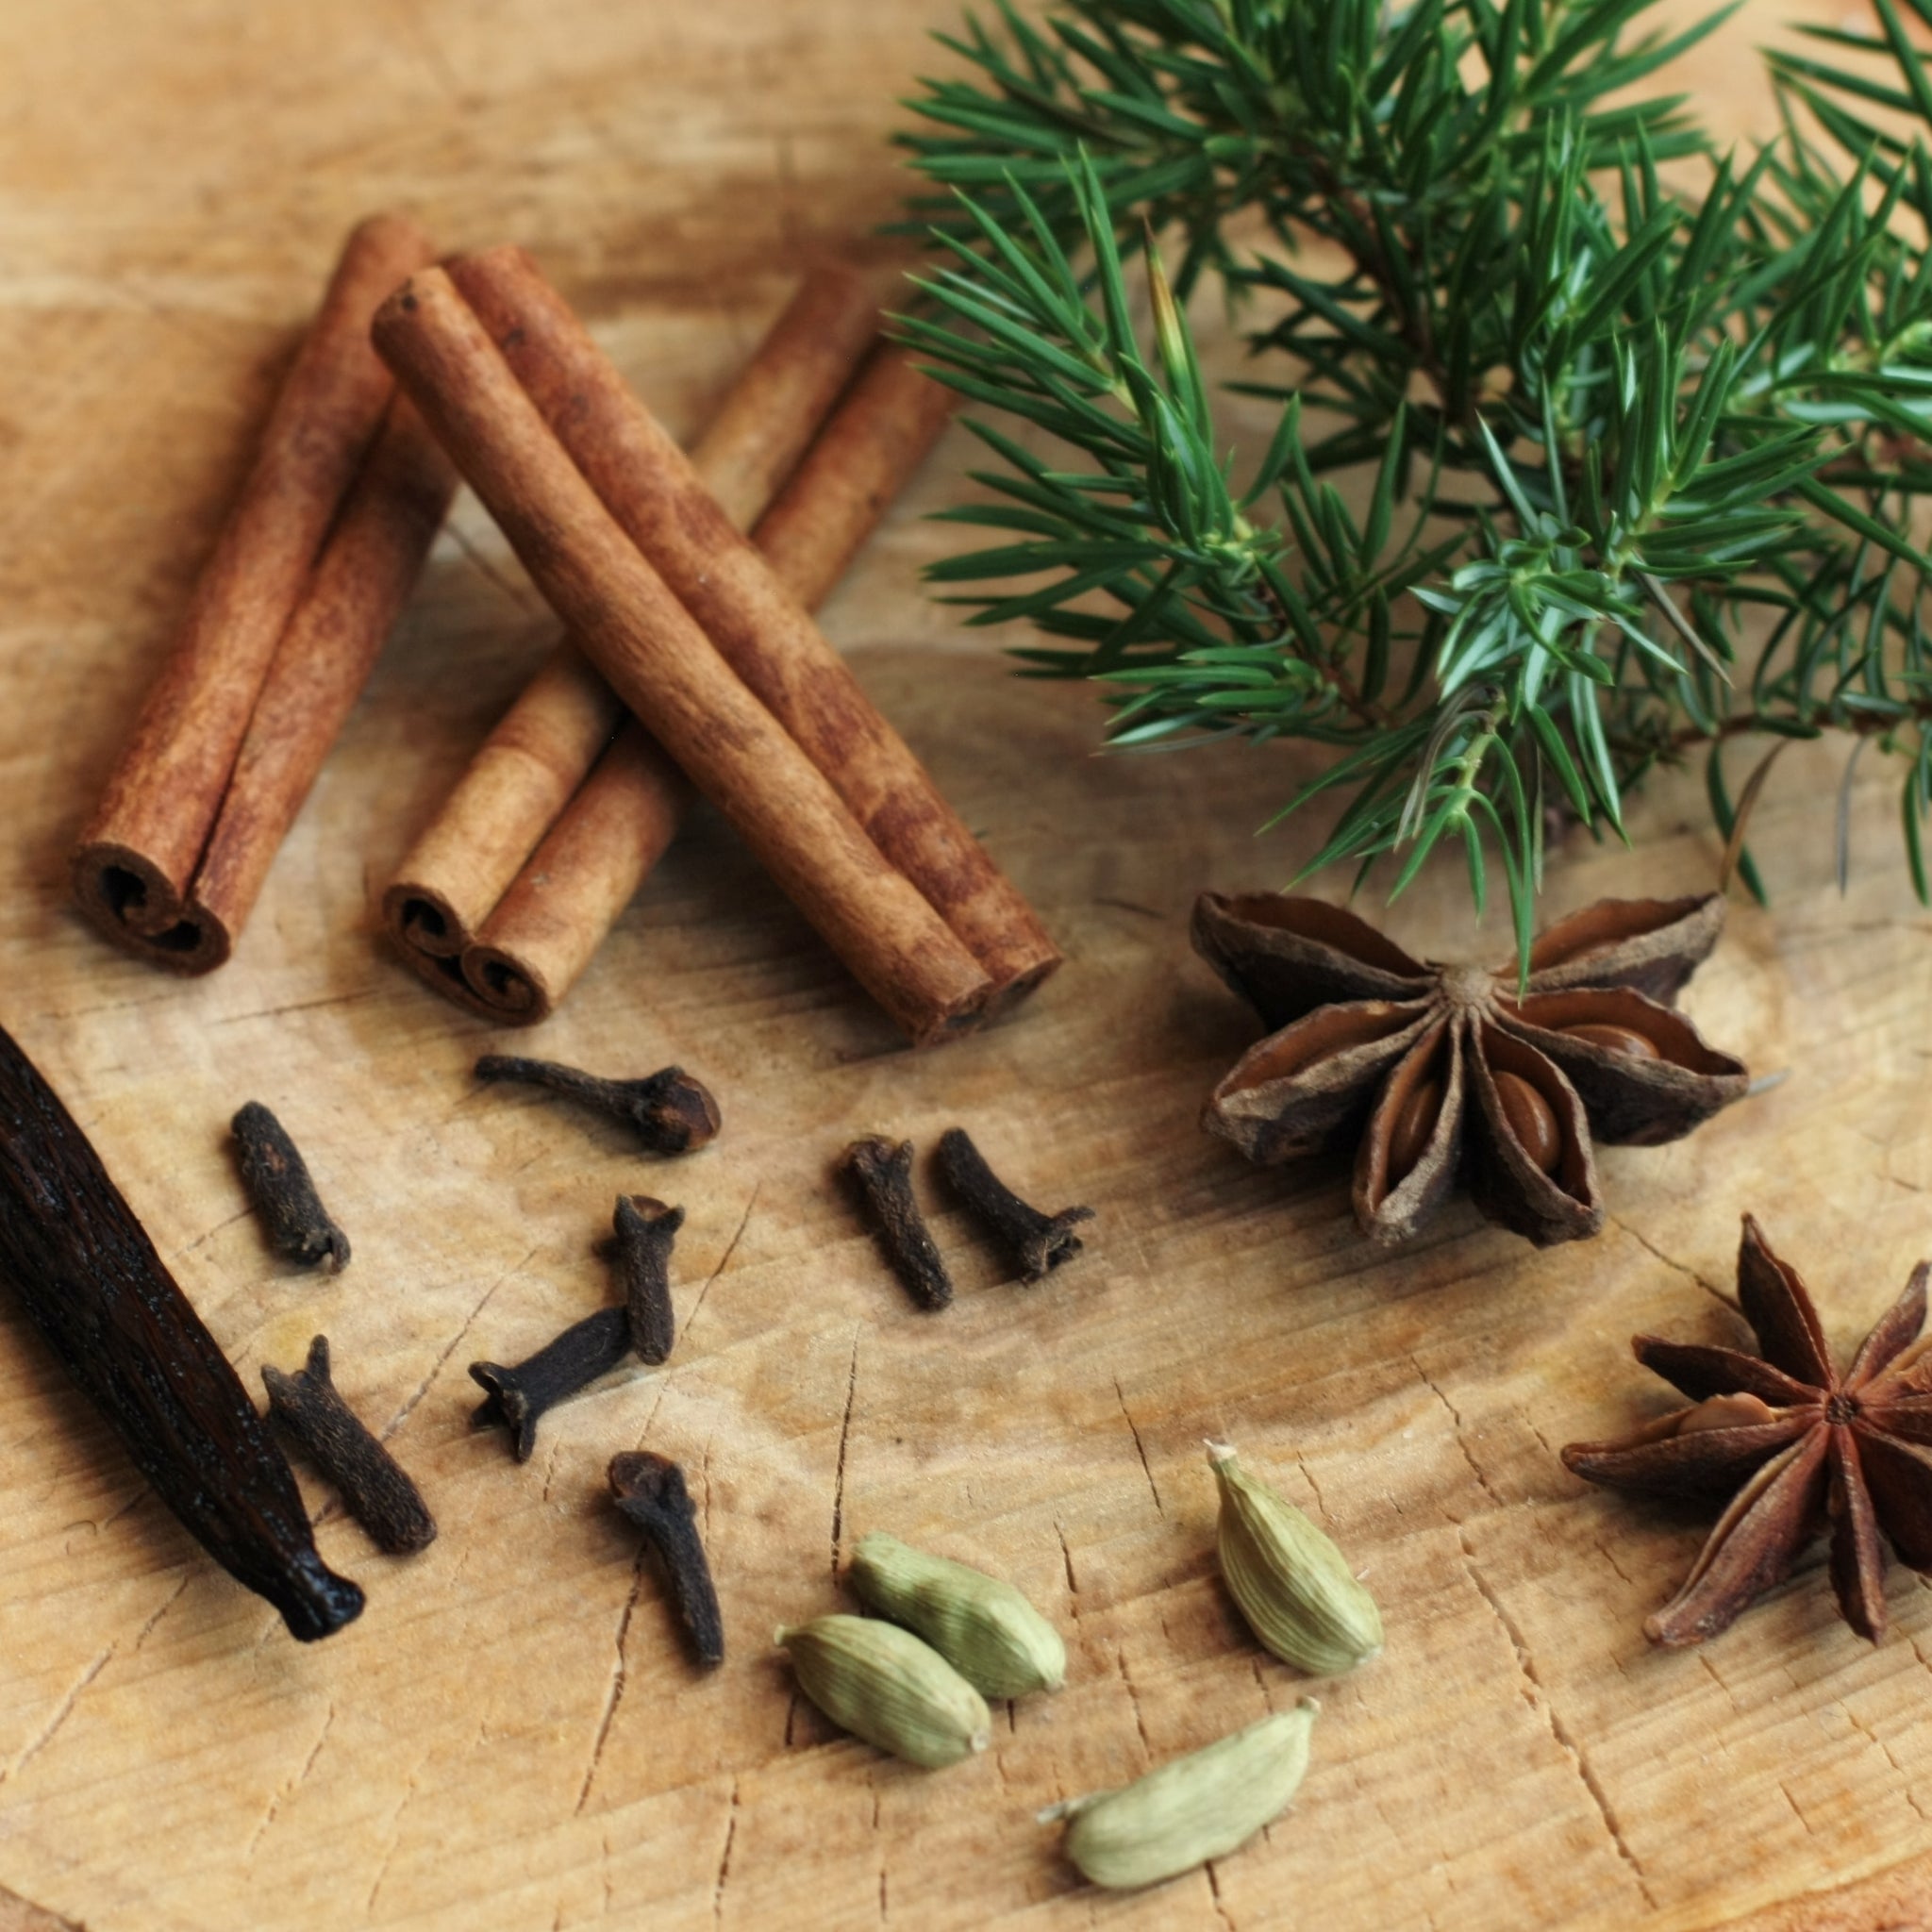 Festive Spices and Herbs from around the world